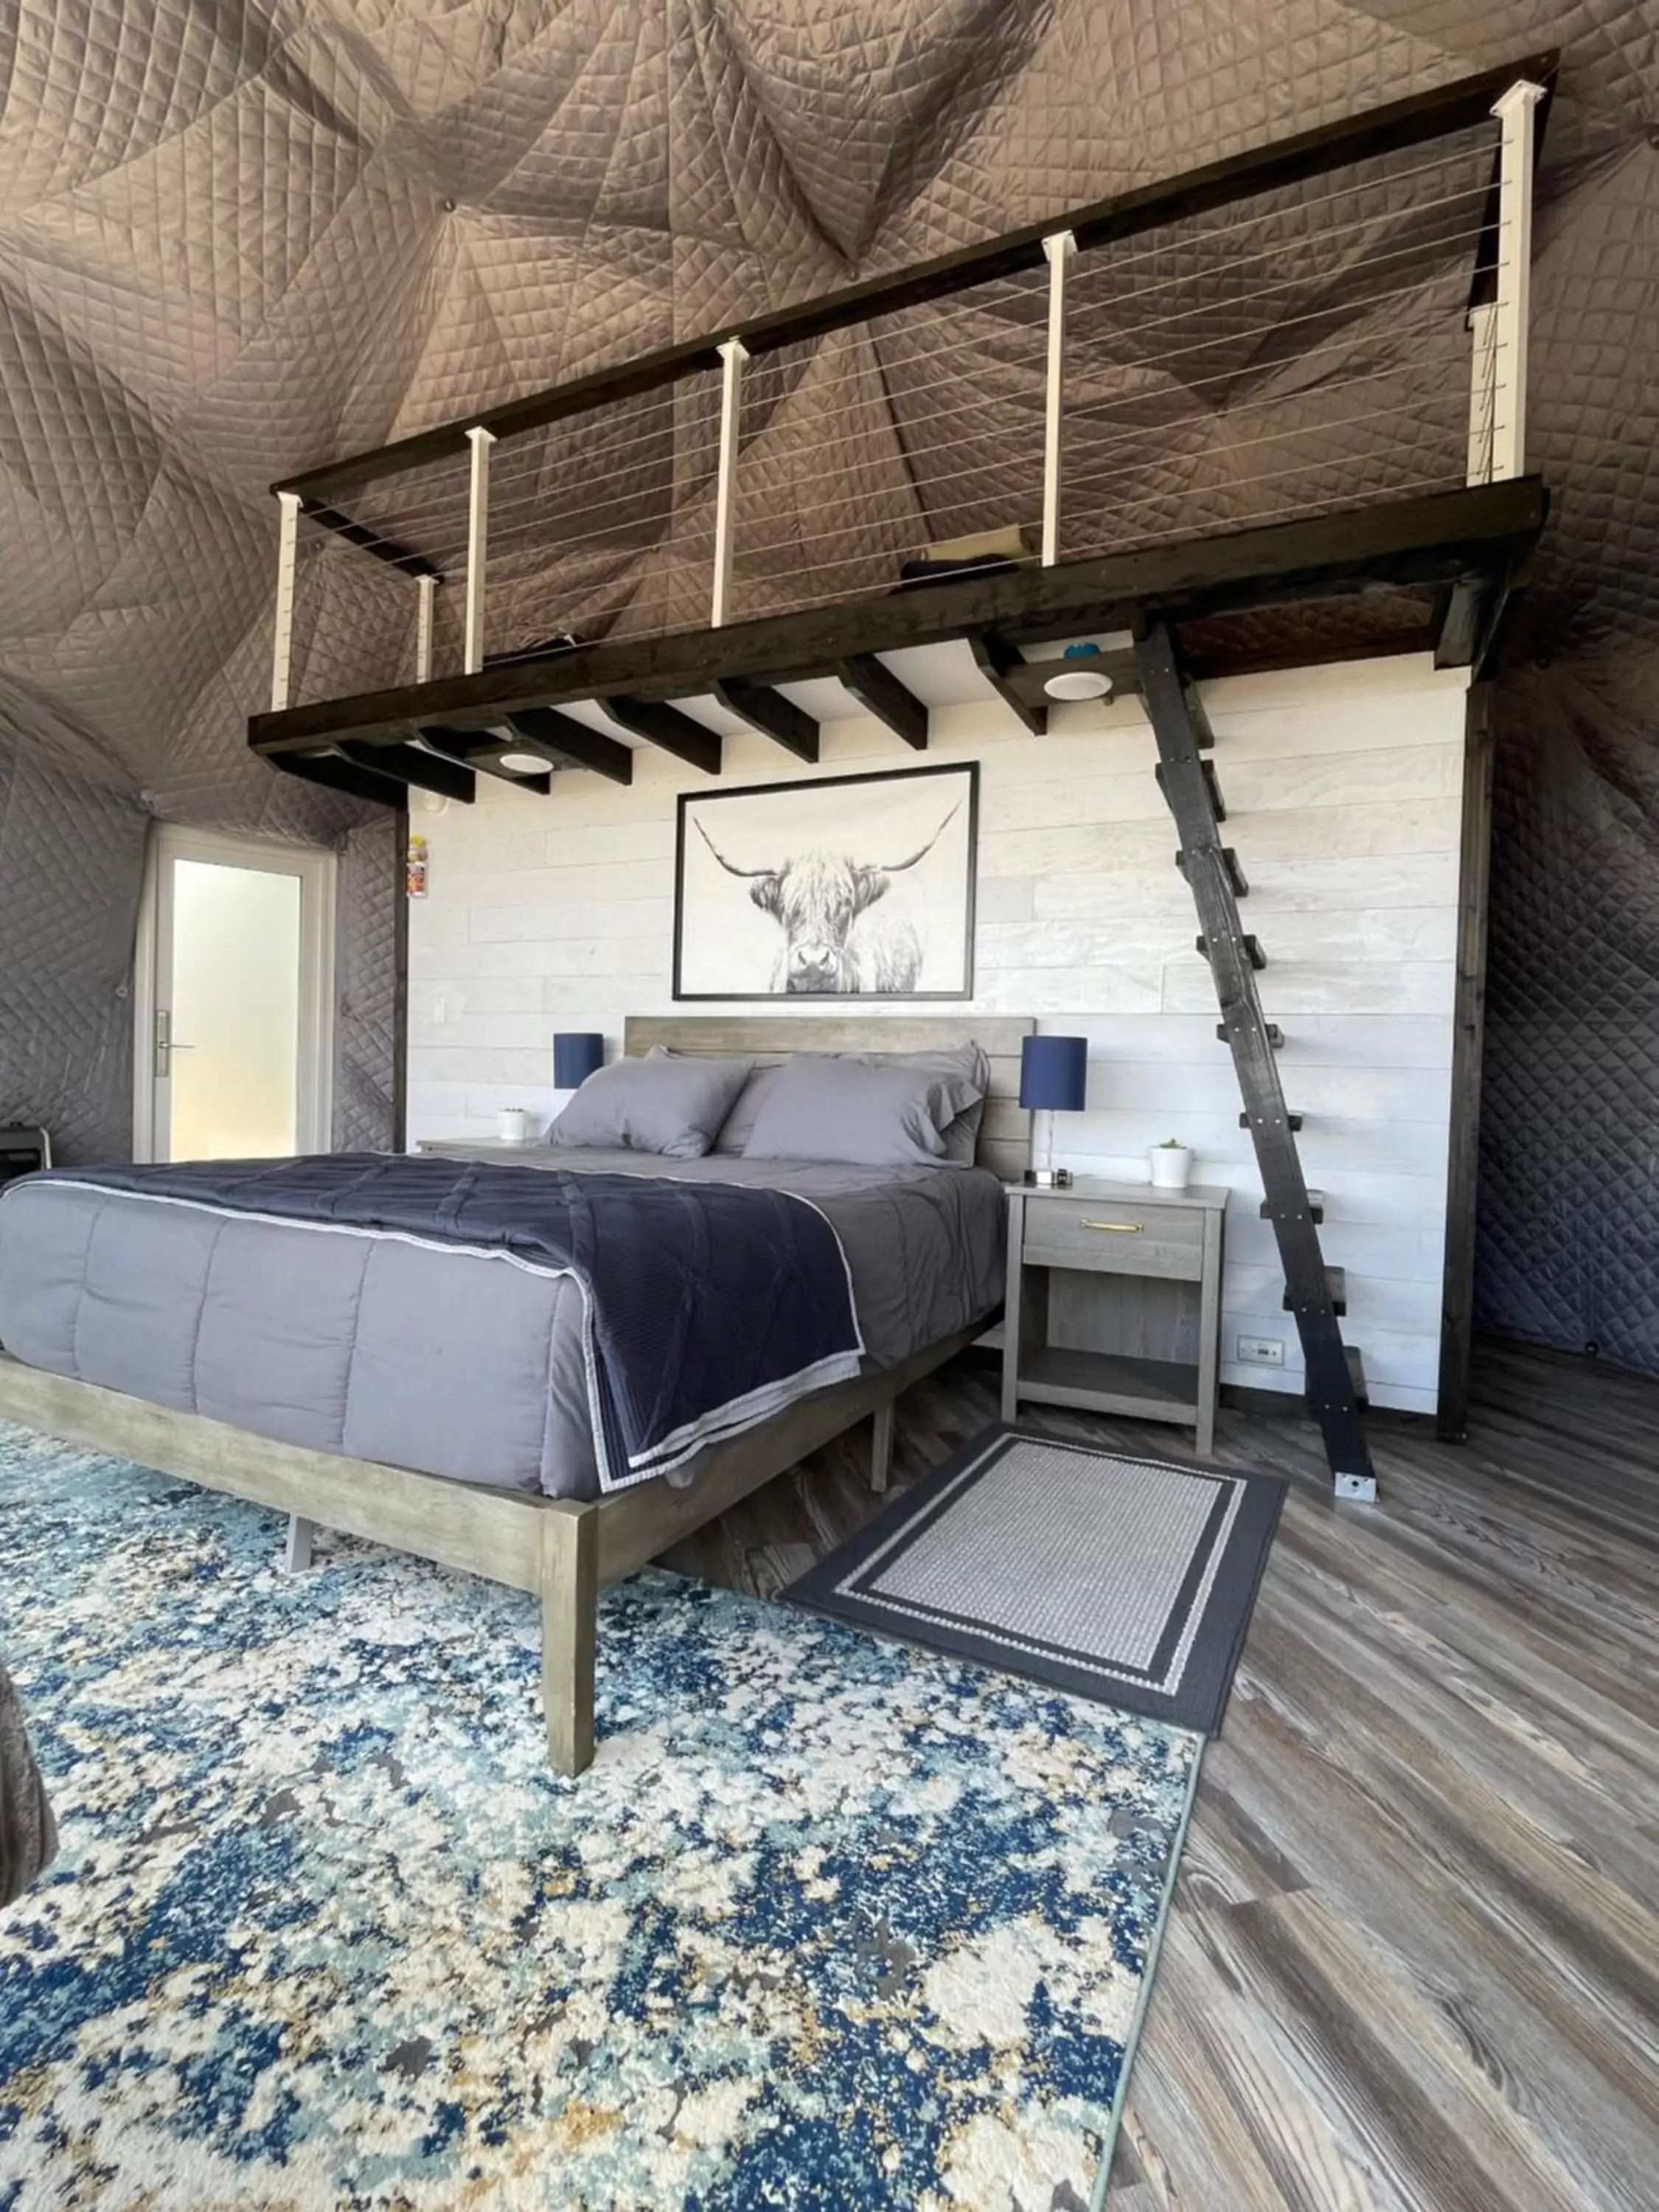 Bed in Canyon Rim Domes - A Luxury Glamping Experience!!